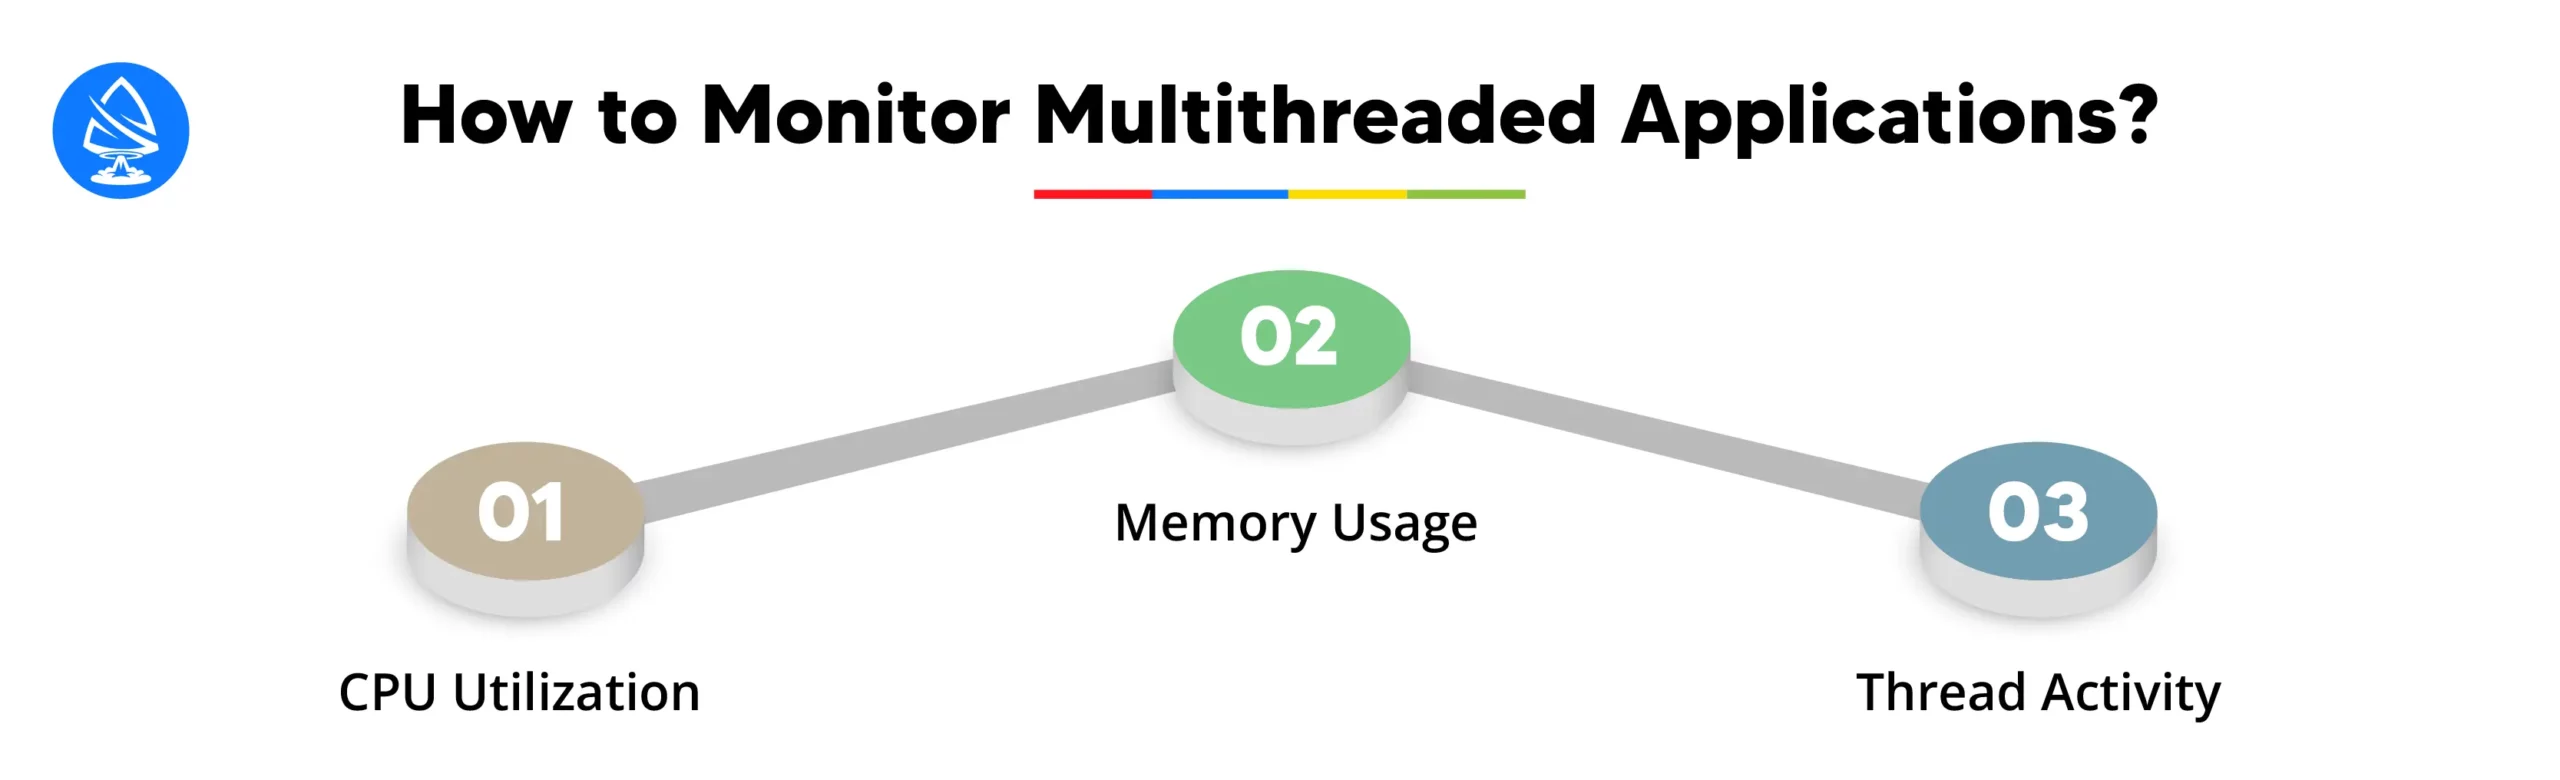 Monitoring Multithreaded Applications 